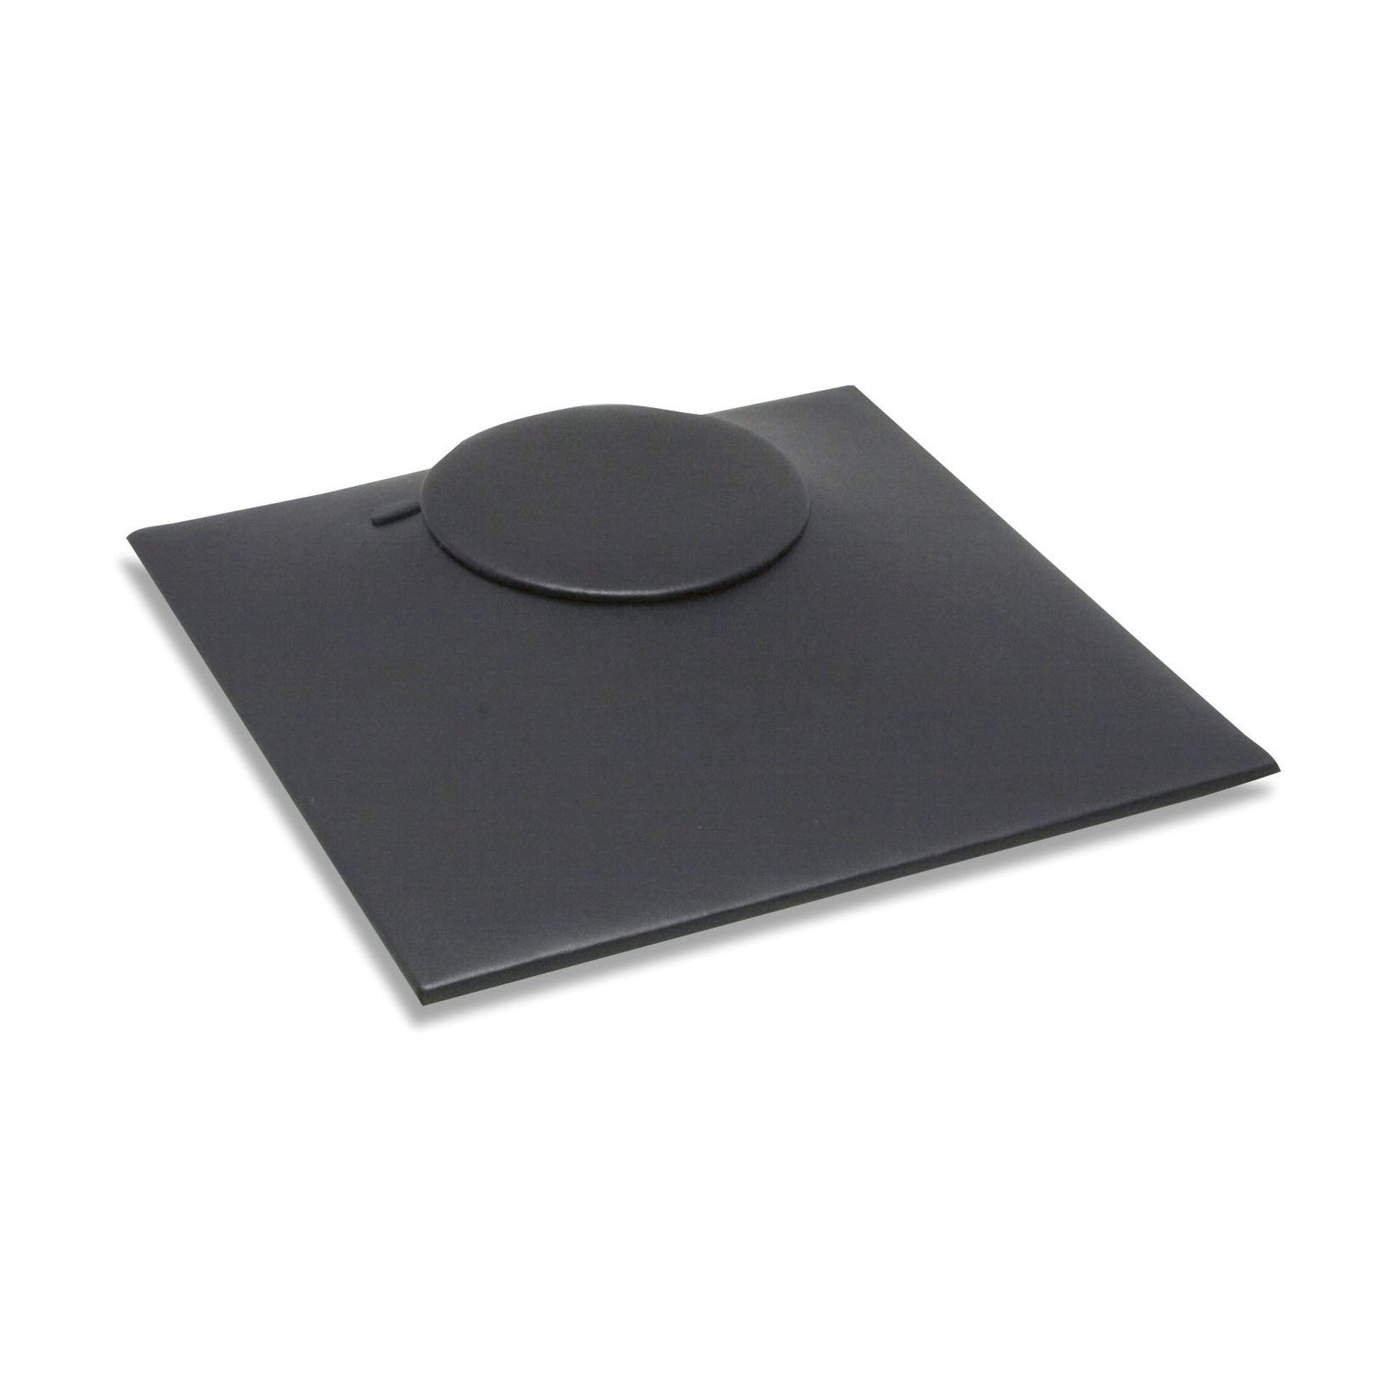 Tray System Inlay, Black, for 1 Necklace, 224 x 224 mm - 1 piece